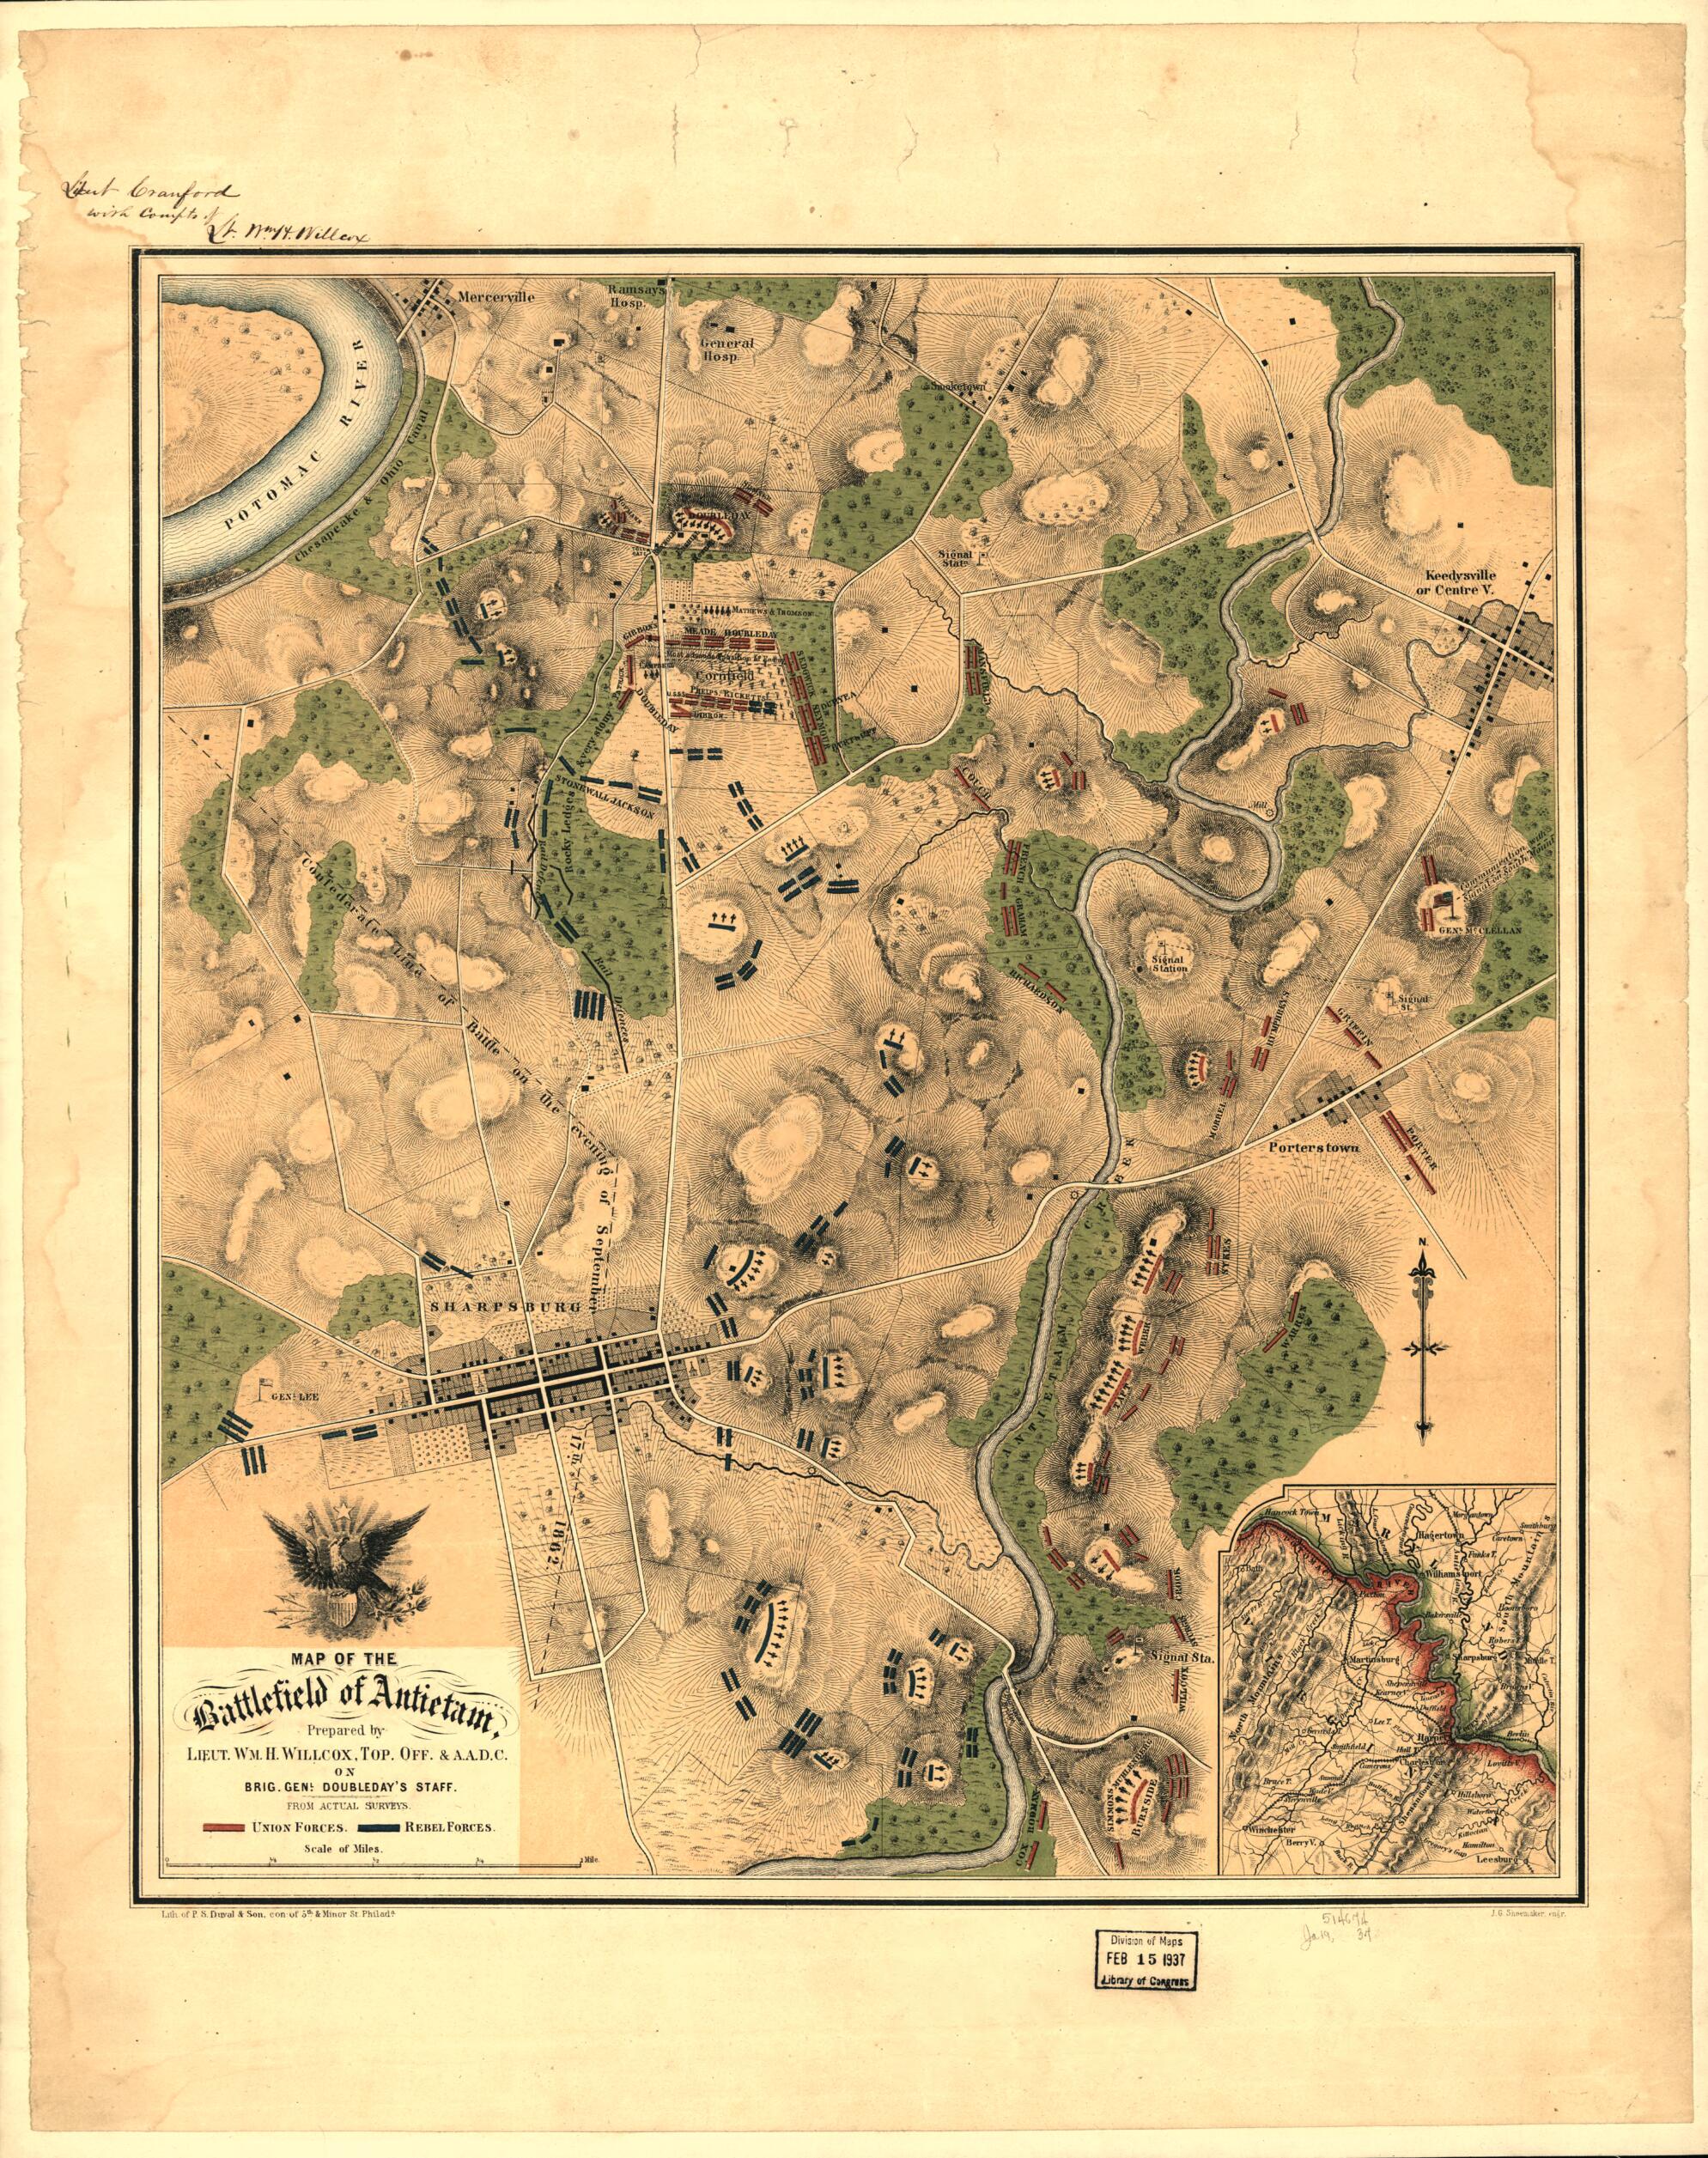 This old map of Map of the Battlefield of Antietam from 1862 was created by William H. Willcox in 1862